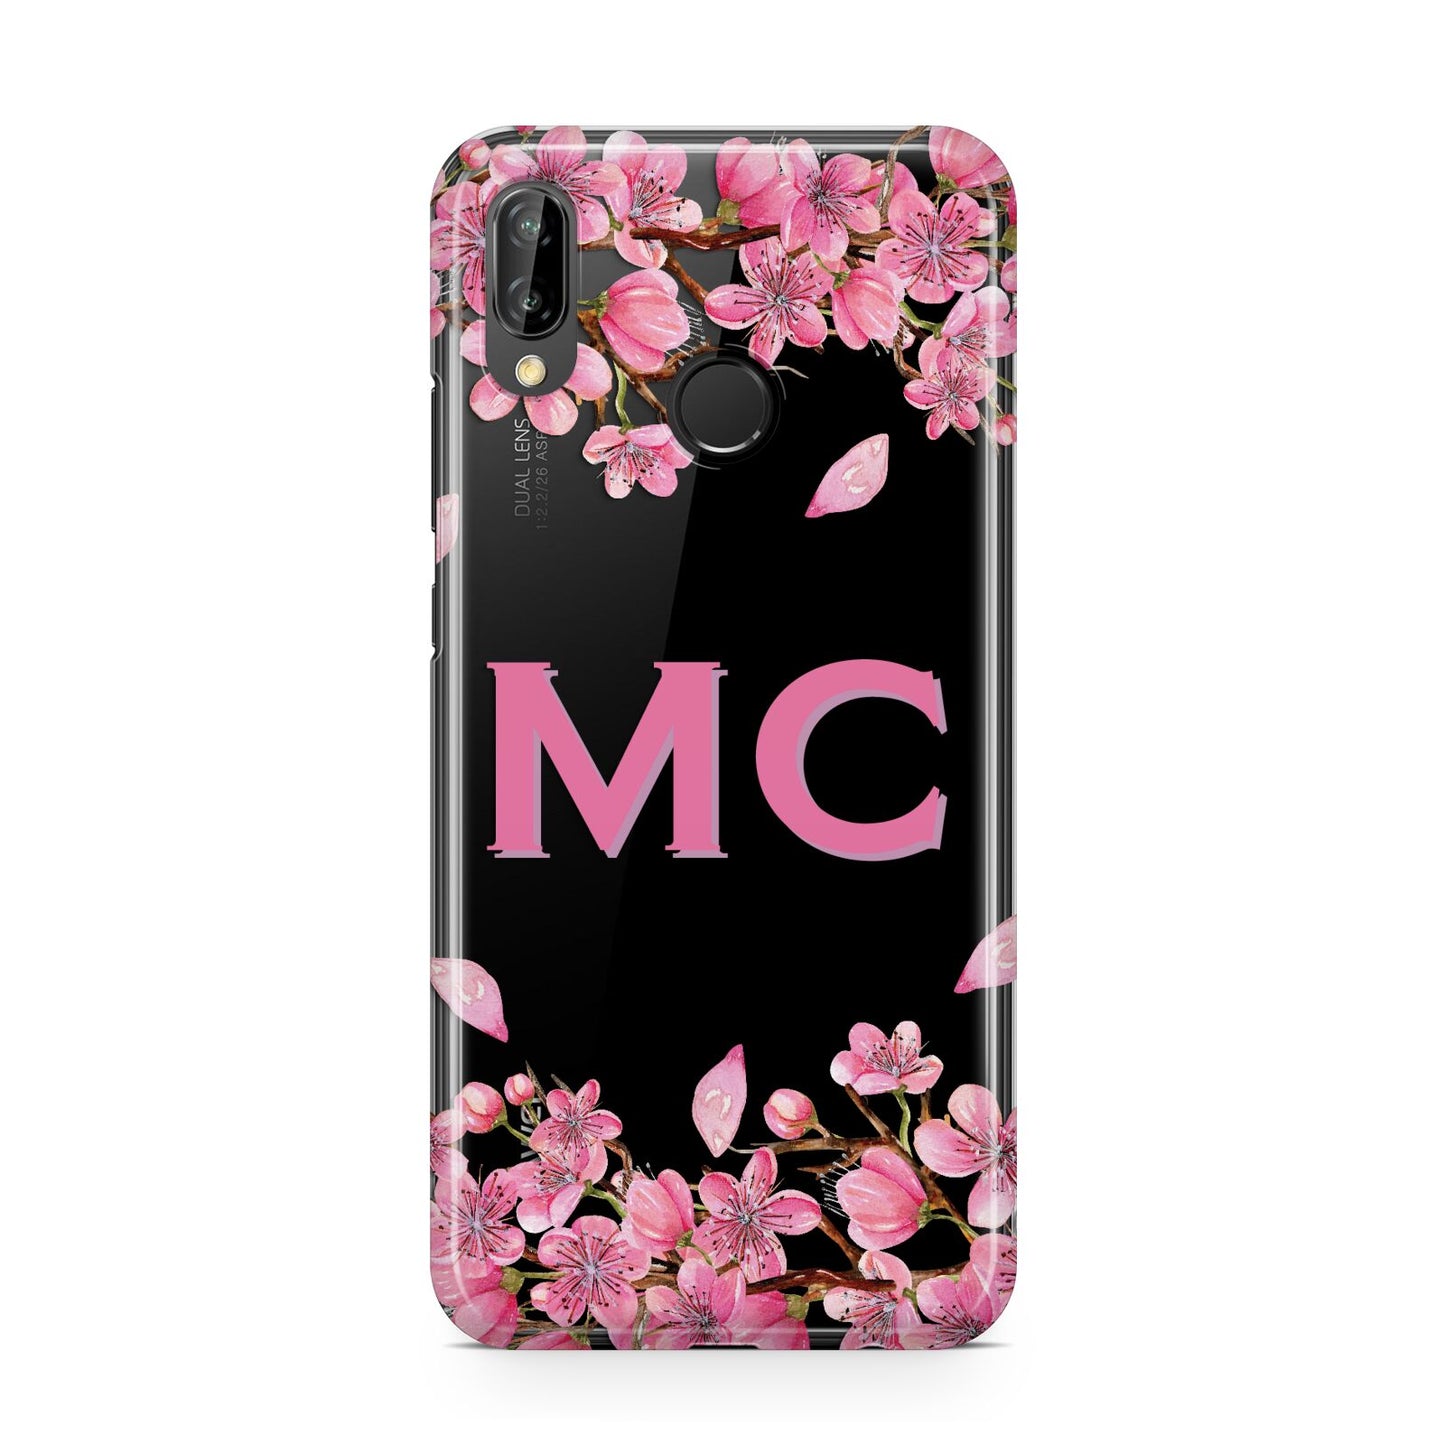 Personalised Vibrant Cherry Blossom Pink Huawei P20 Lite Phone Case